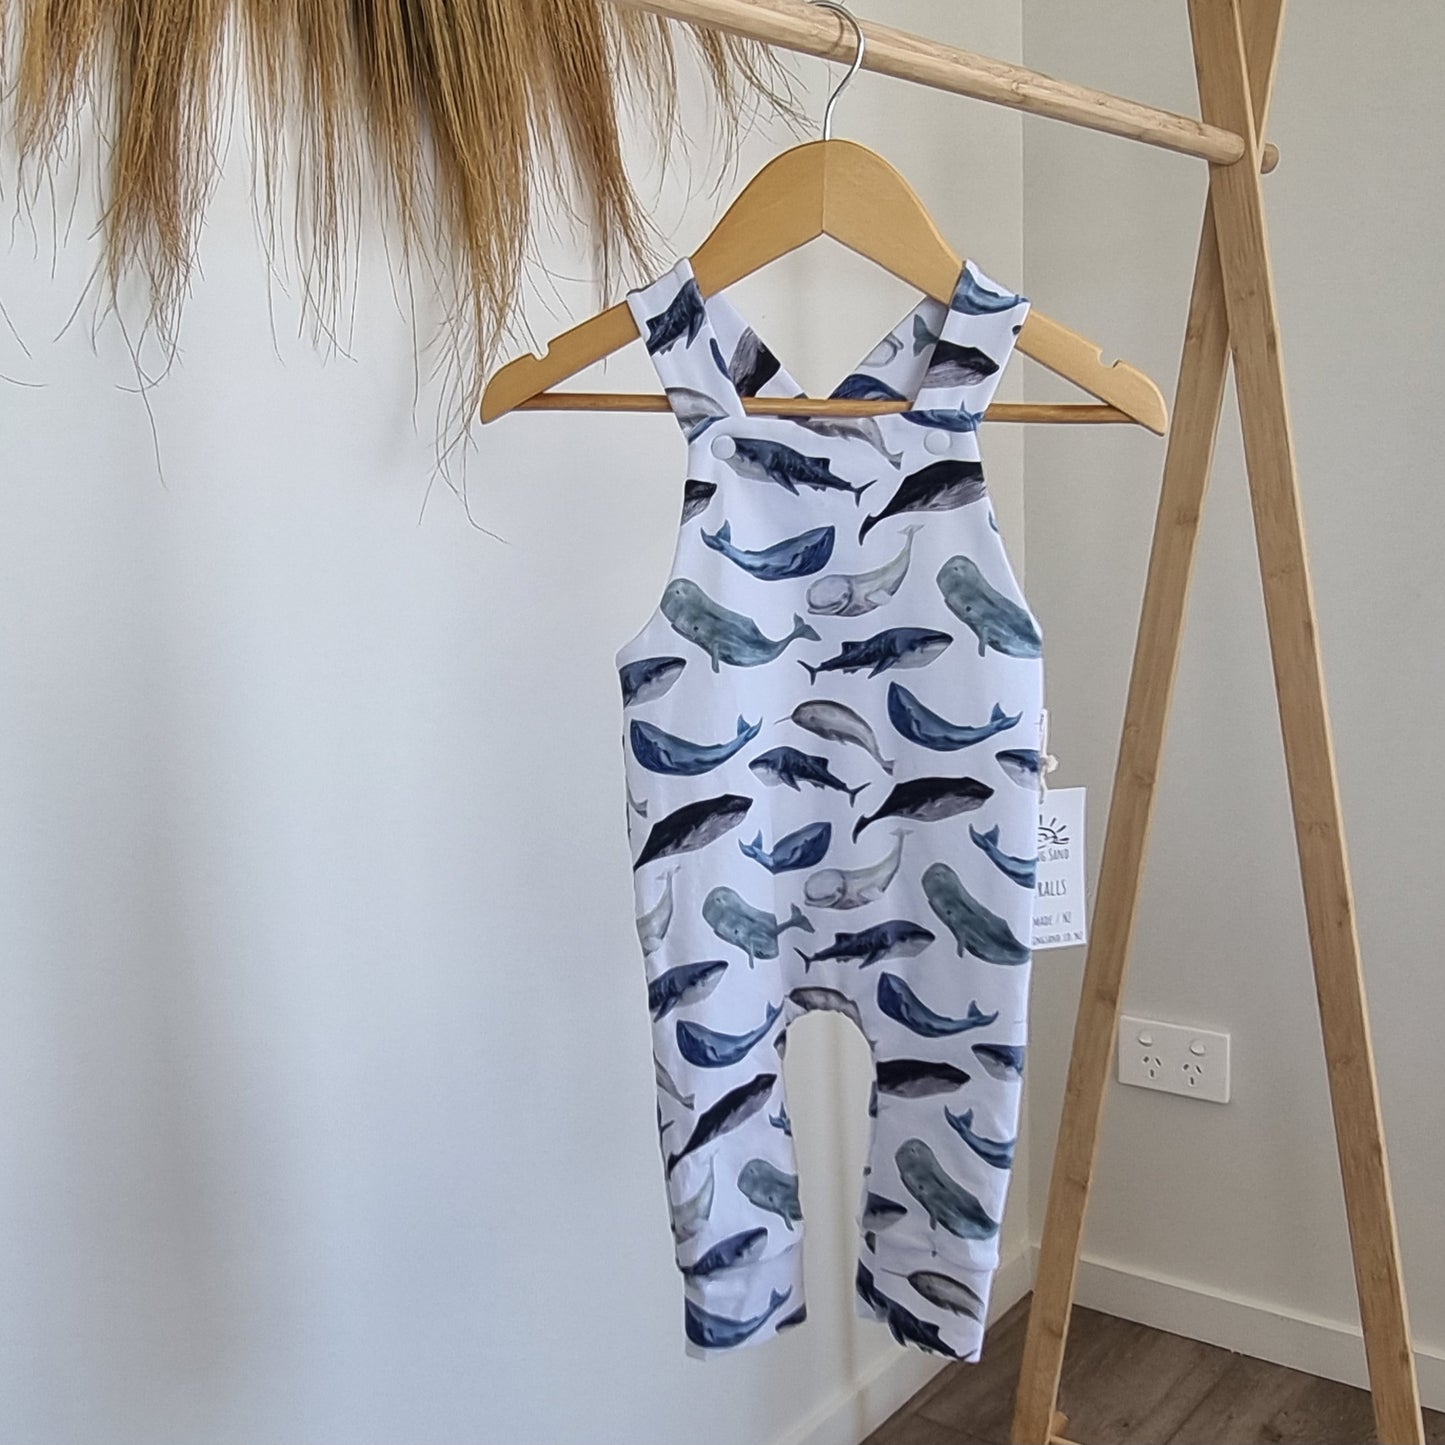 Long Overalls - Ocean hanging on wooden rack. Whale illustrations on white background. 